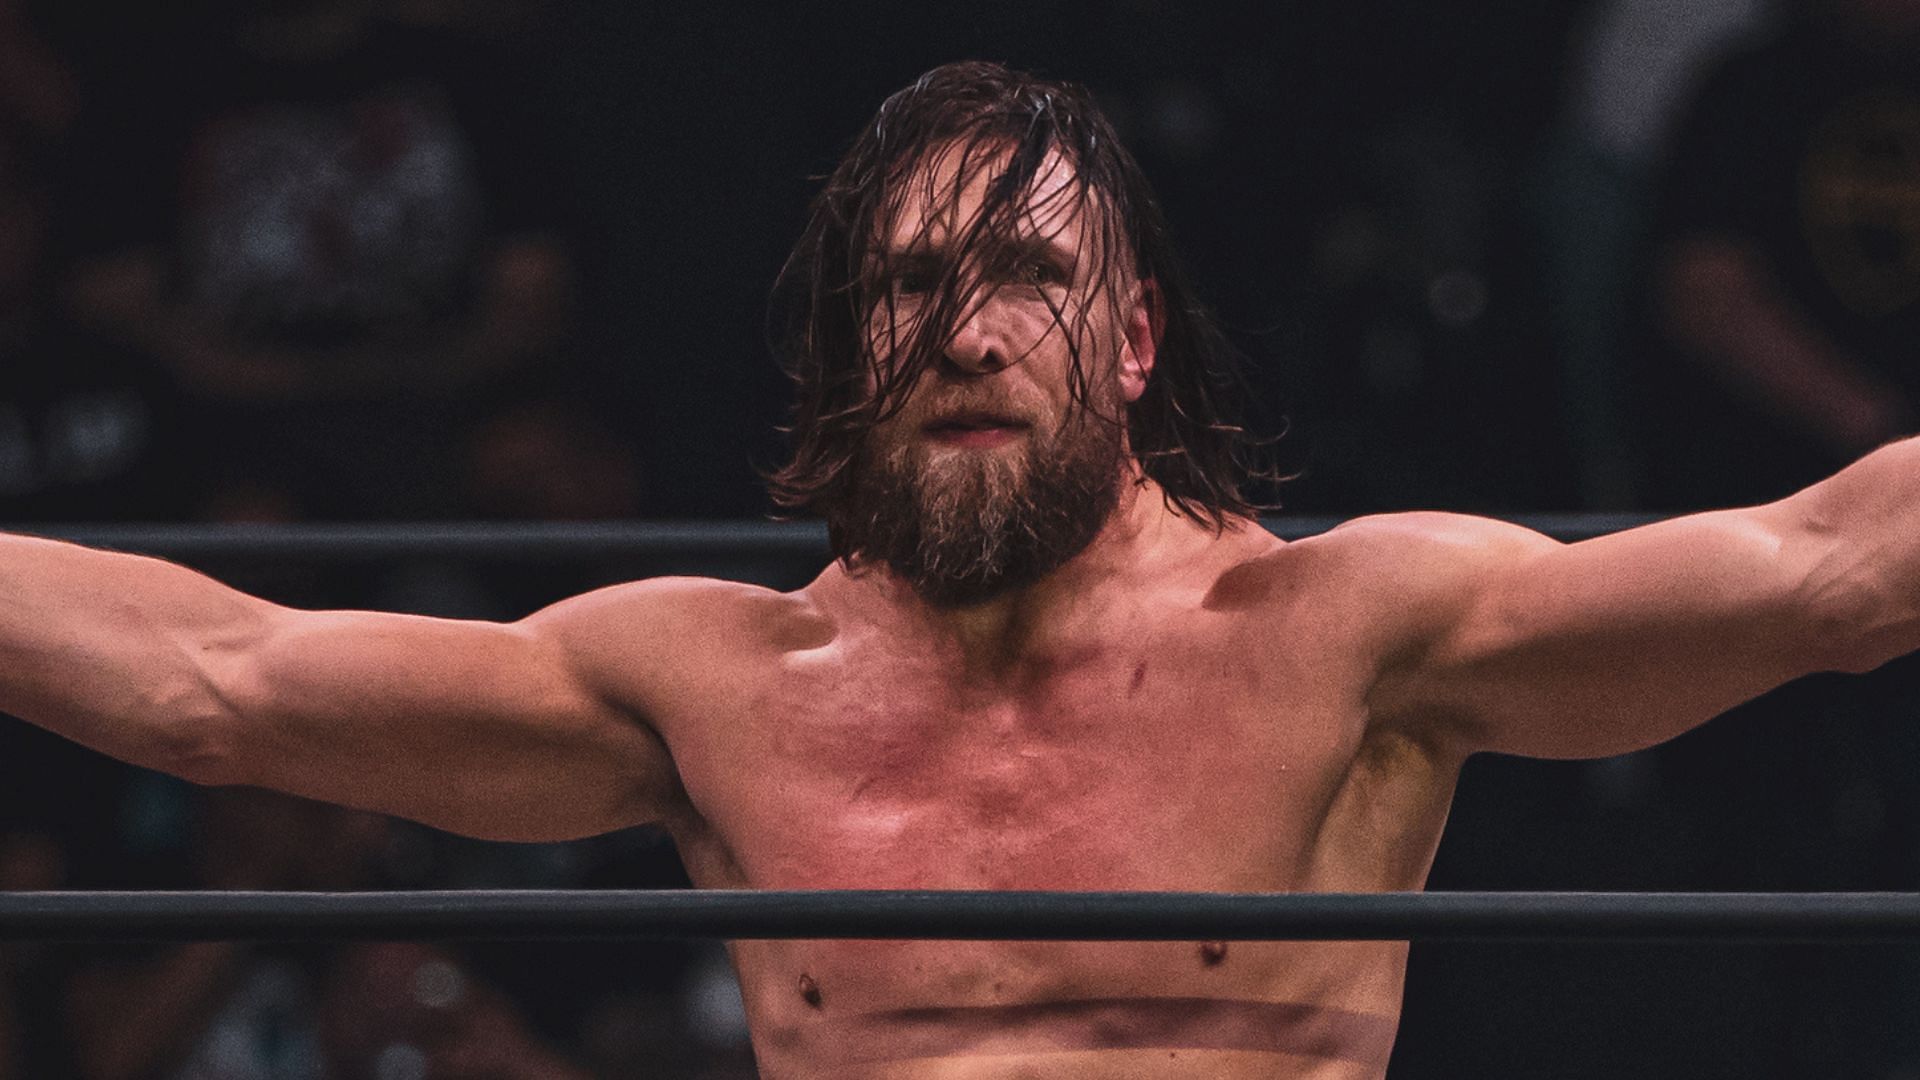 There has been an unfortunate update on Bryan Danielson